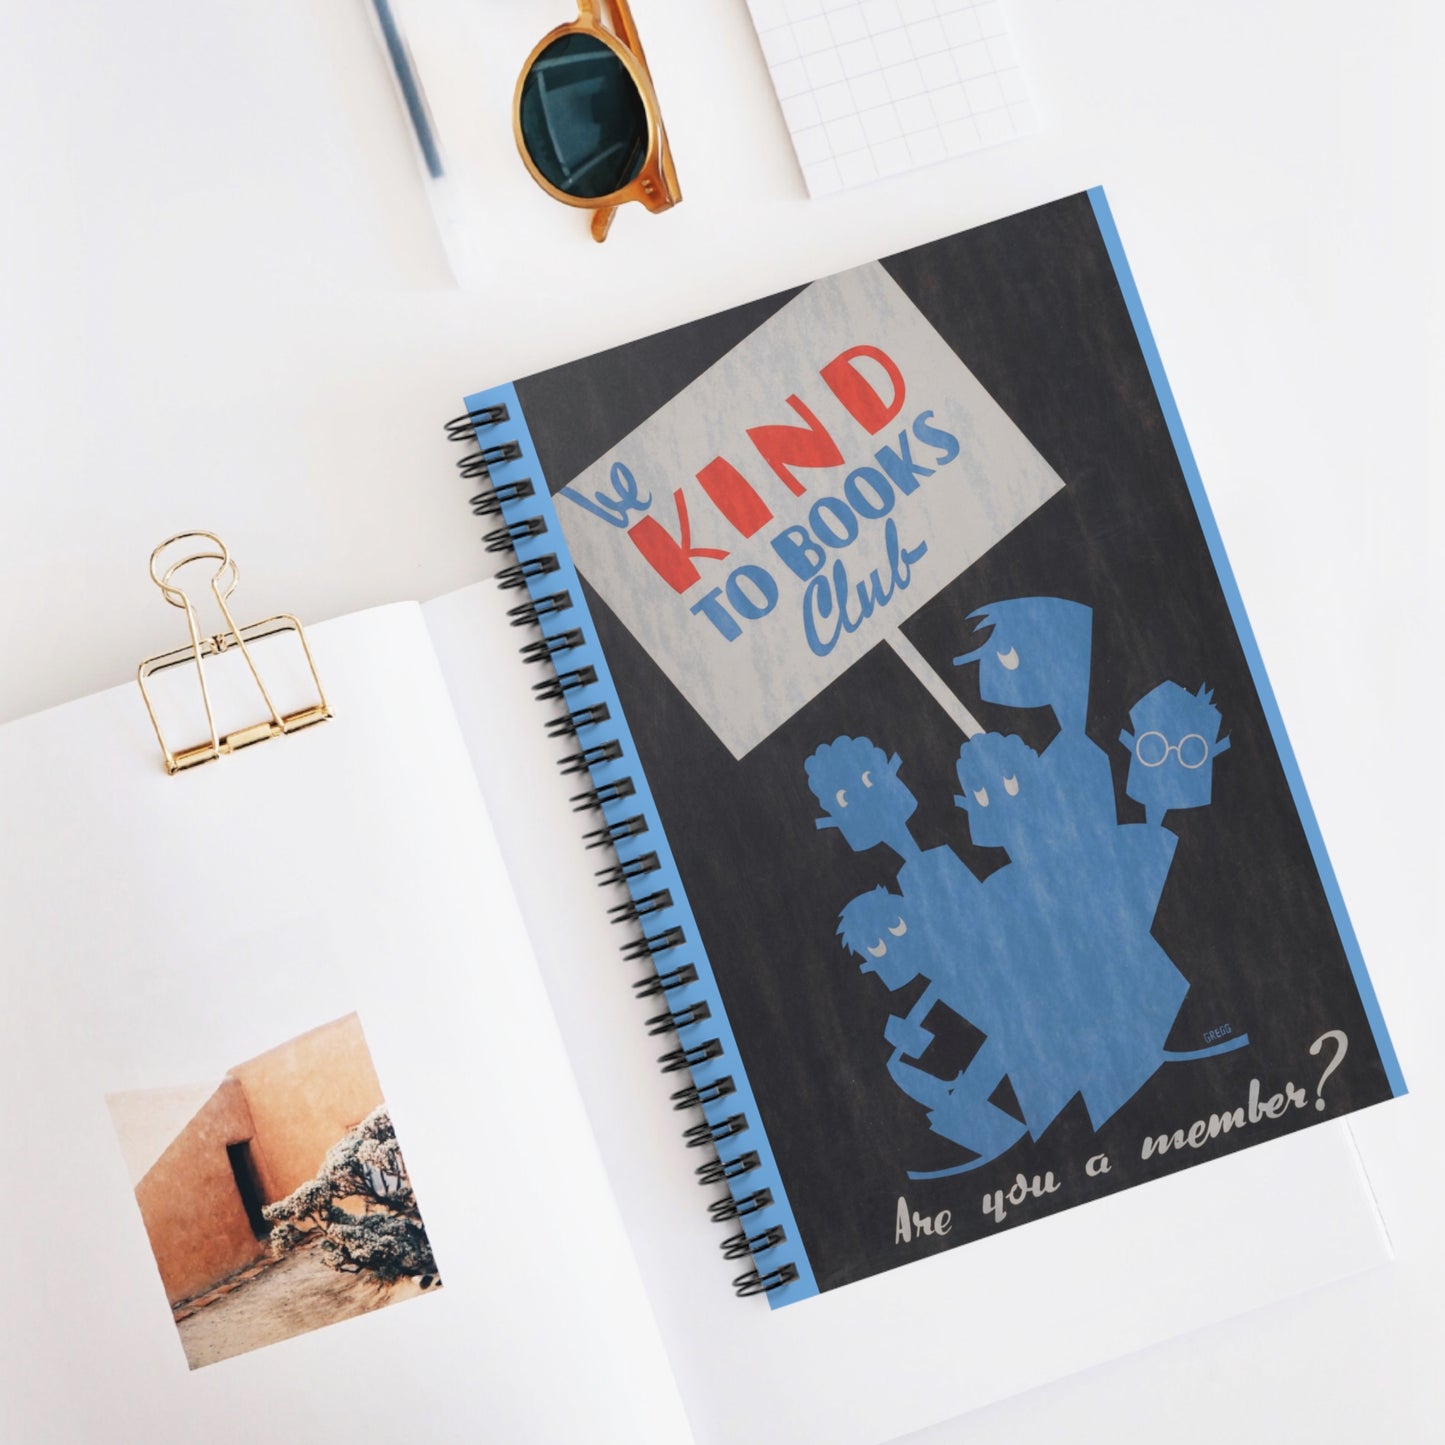 Vintage "Be Kind To Books Club" Spiral Notebook - Ruled Line